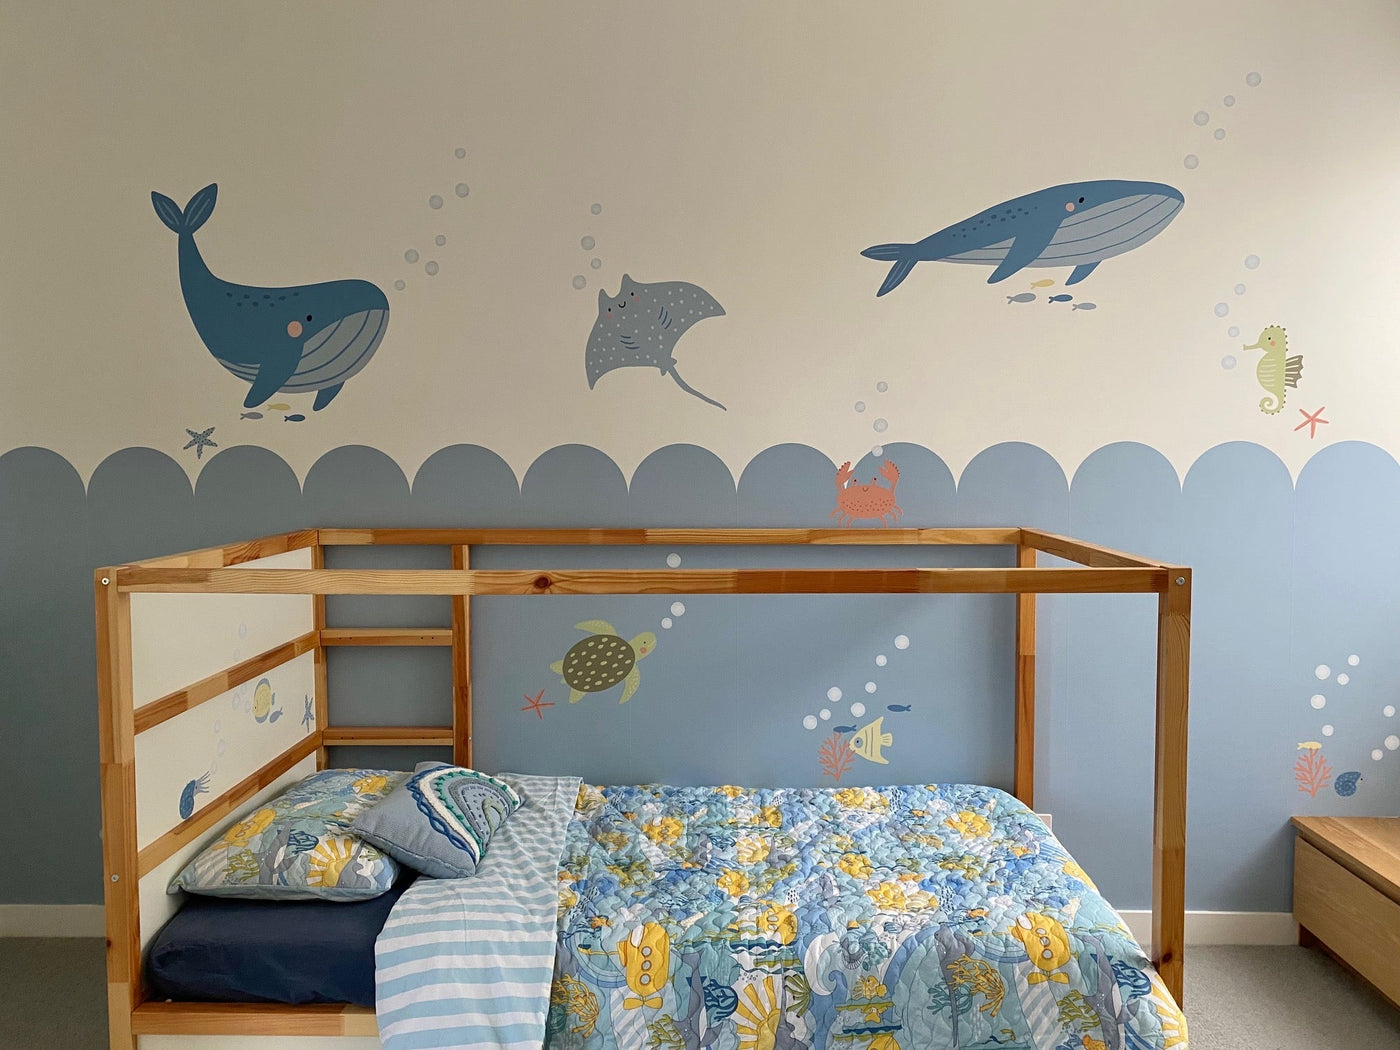 Under The Sea Wall Decals - Jack Harry and Ollie